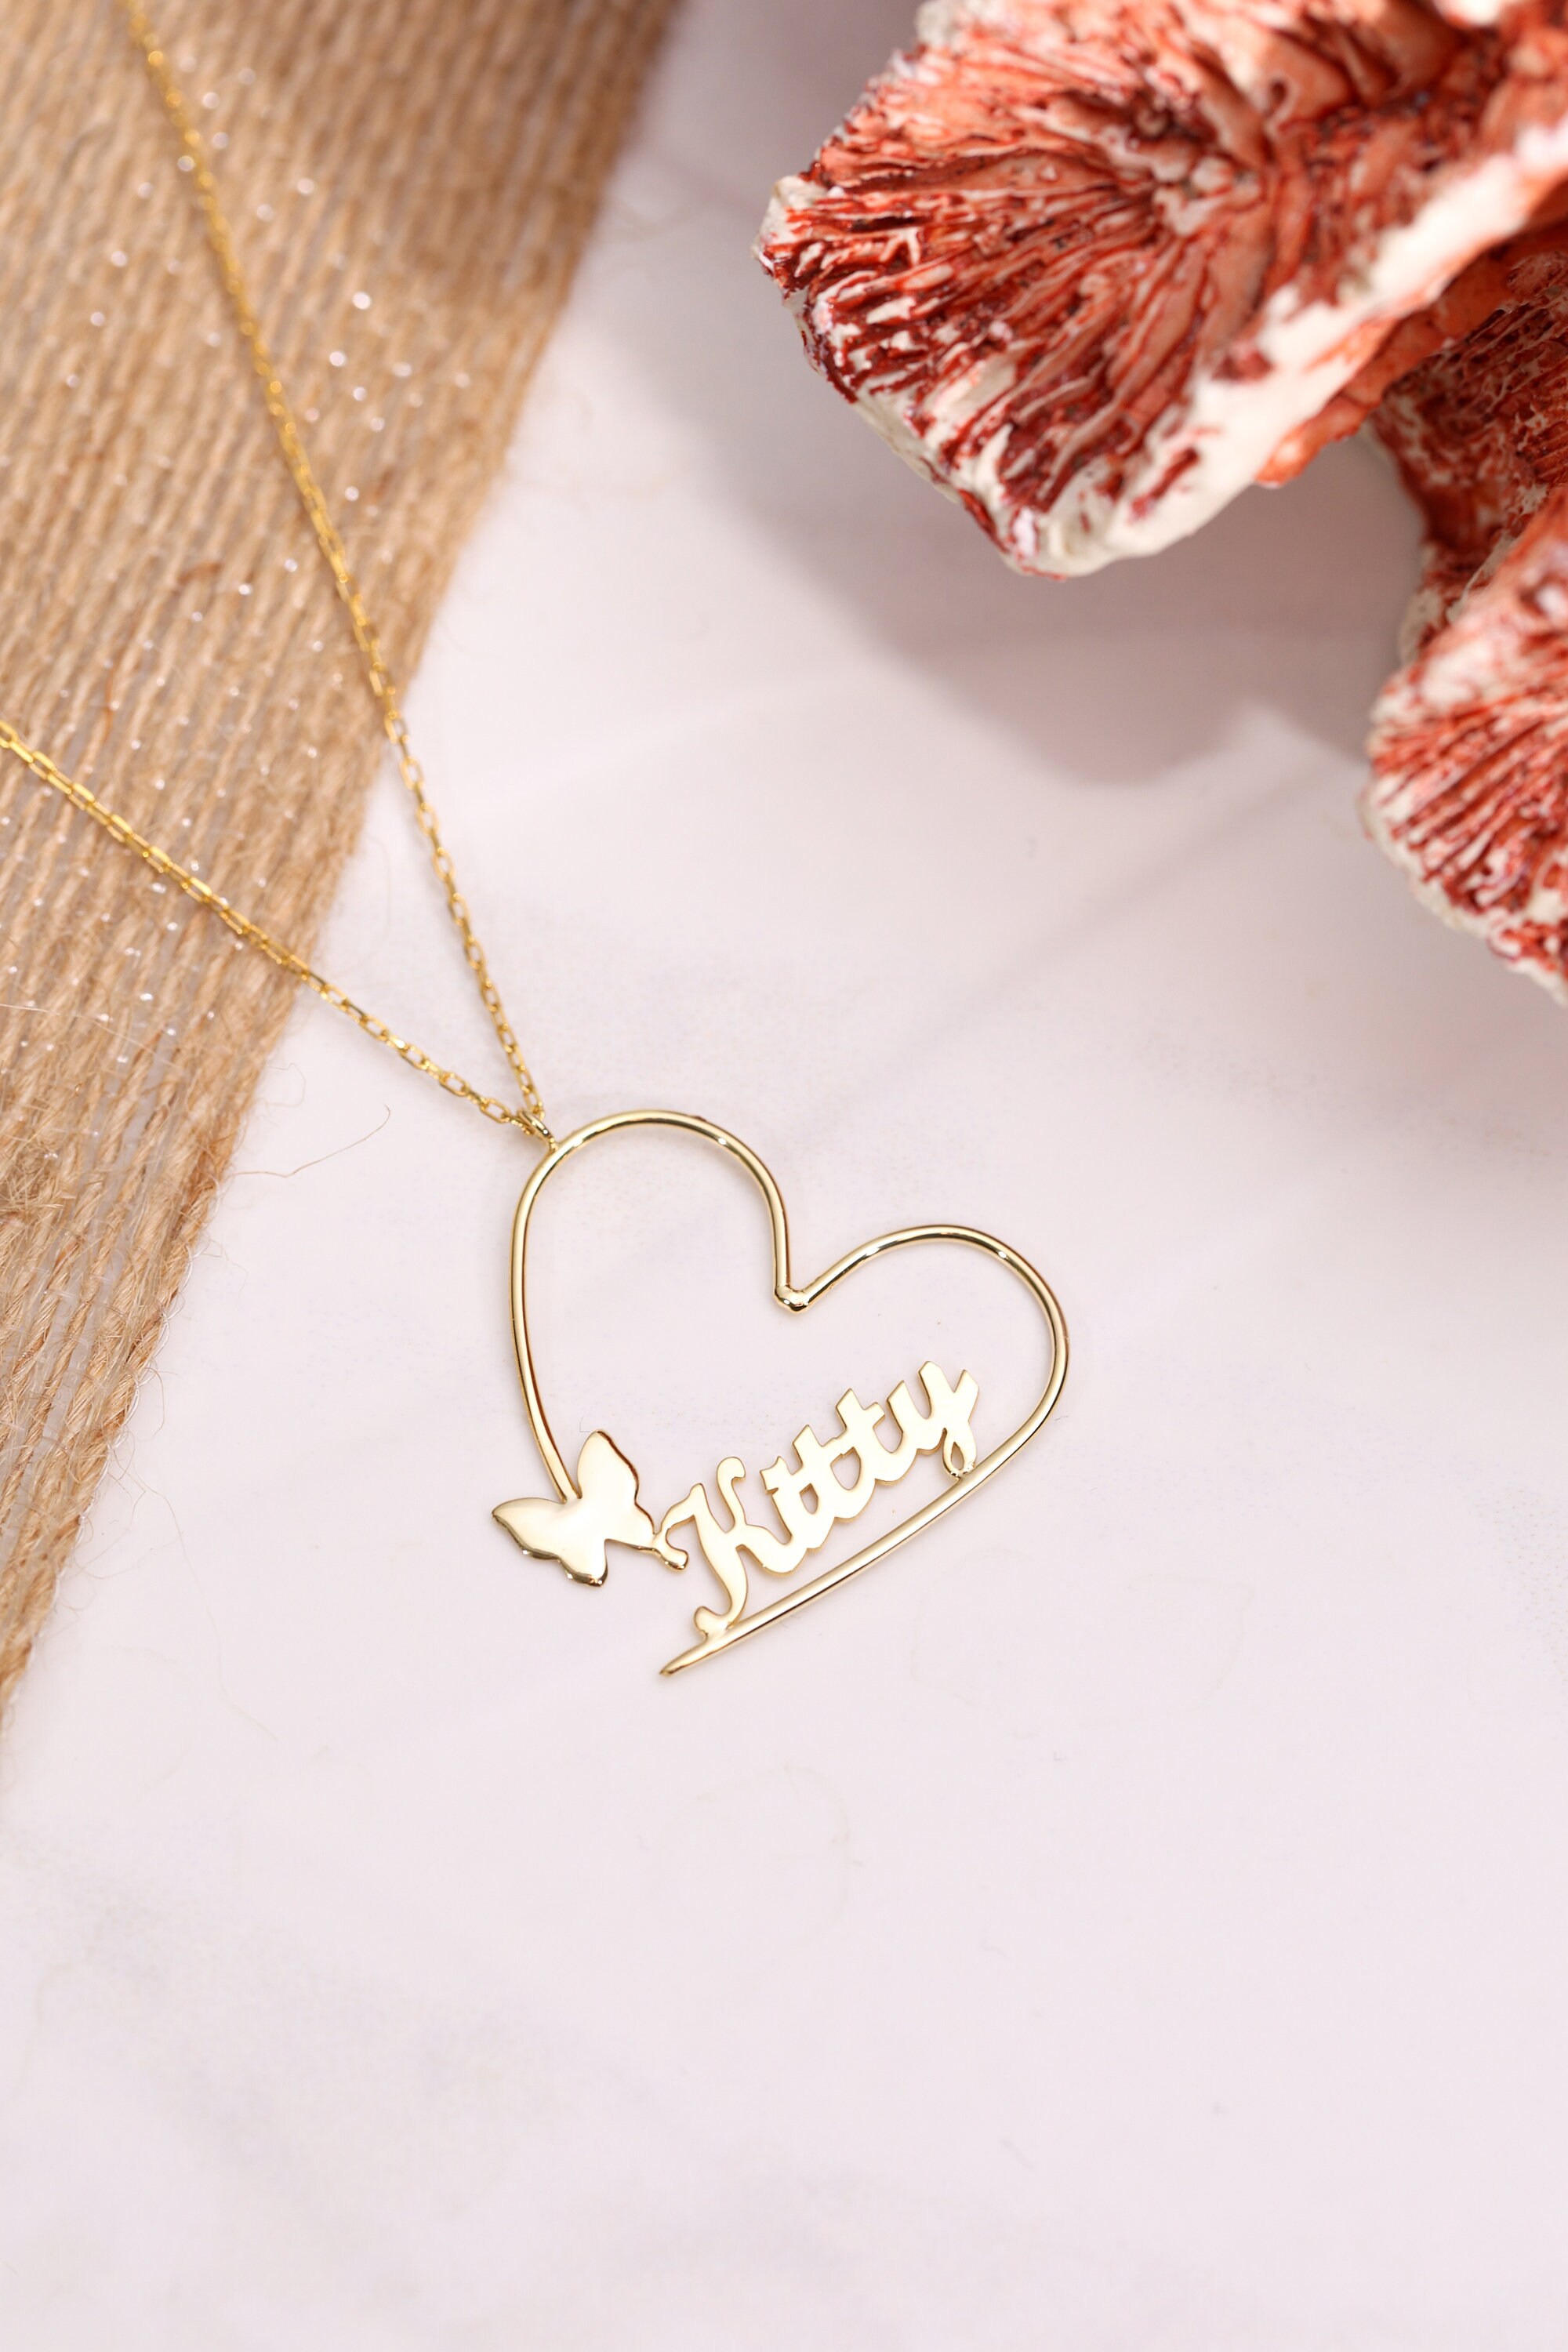 Butterfly Name Necklace, Gold Butterfly Necklaces, Heart Butterfly ...